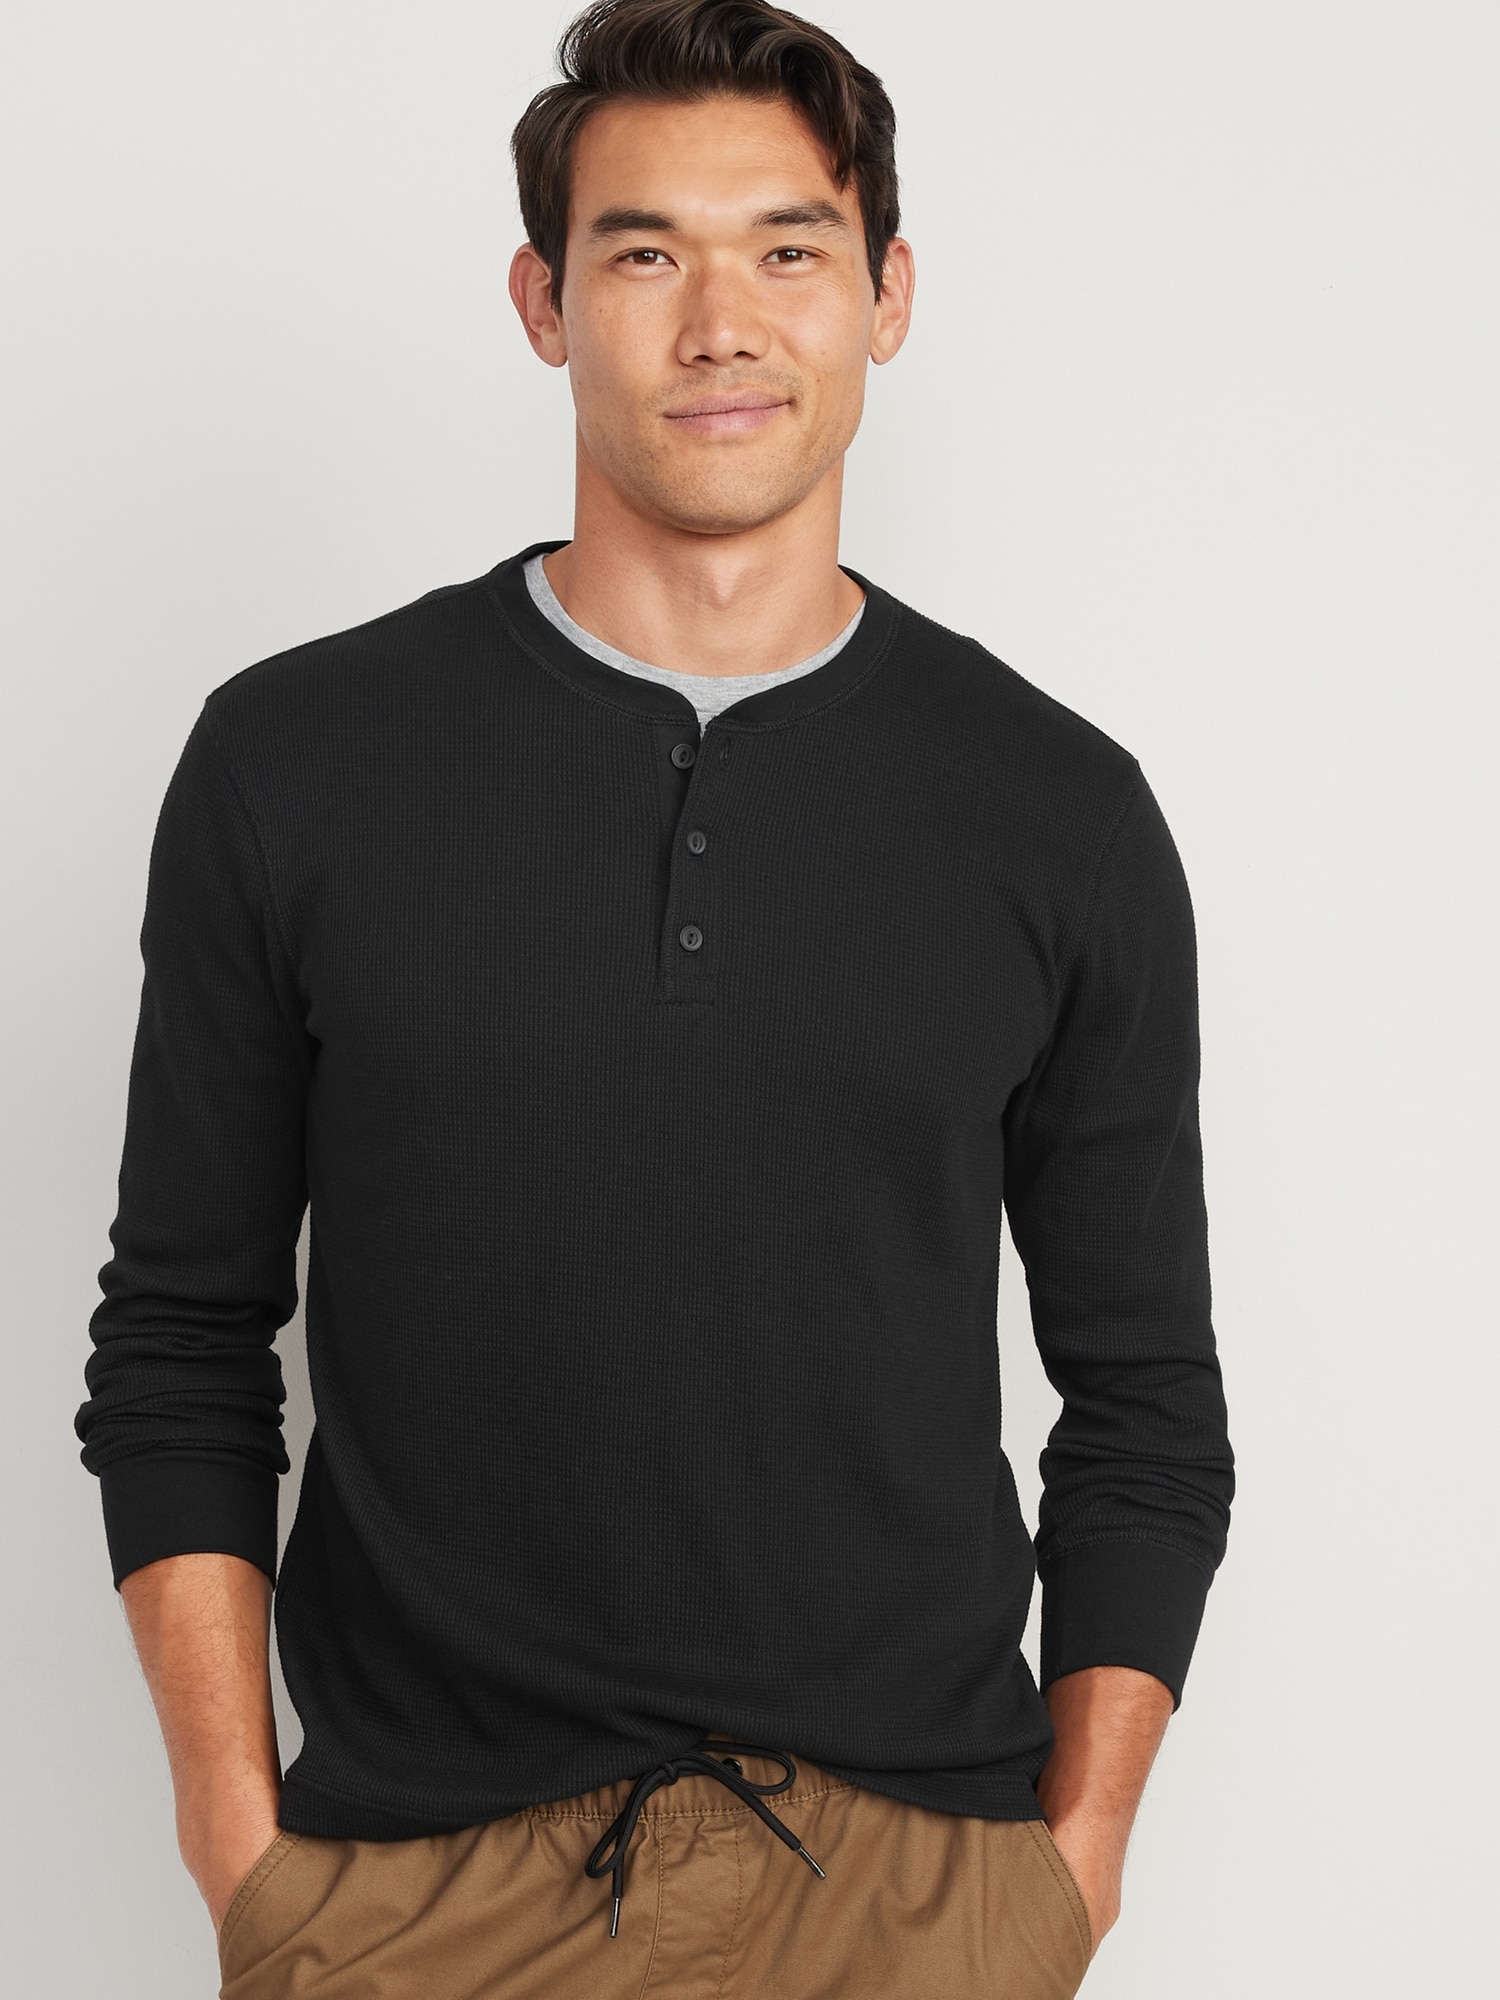 Thermal-Knit Long-Sleeve Henley T-Shirt for Men | Old Navy